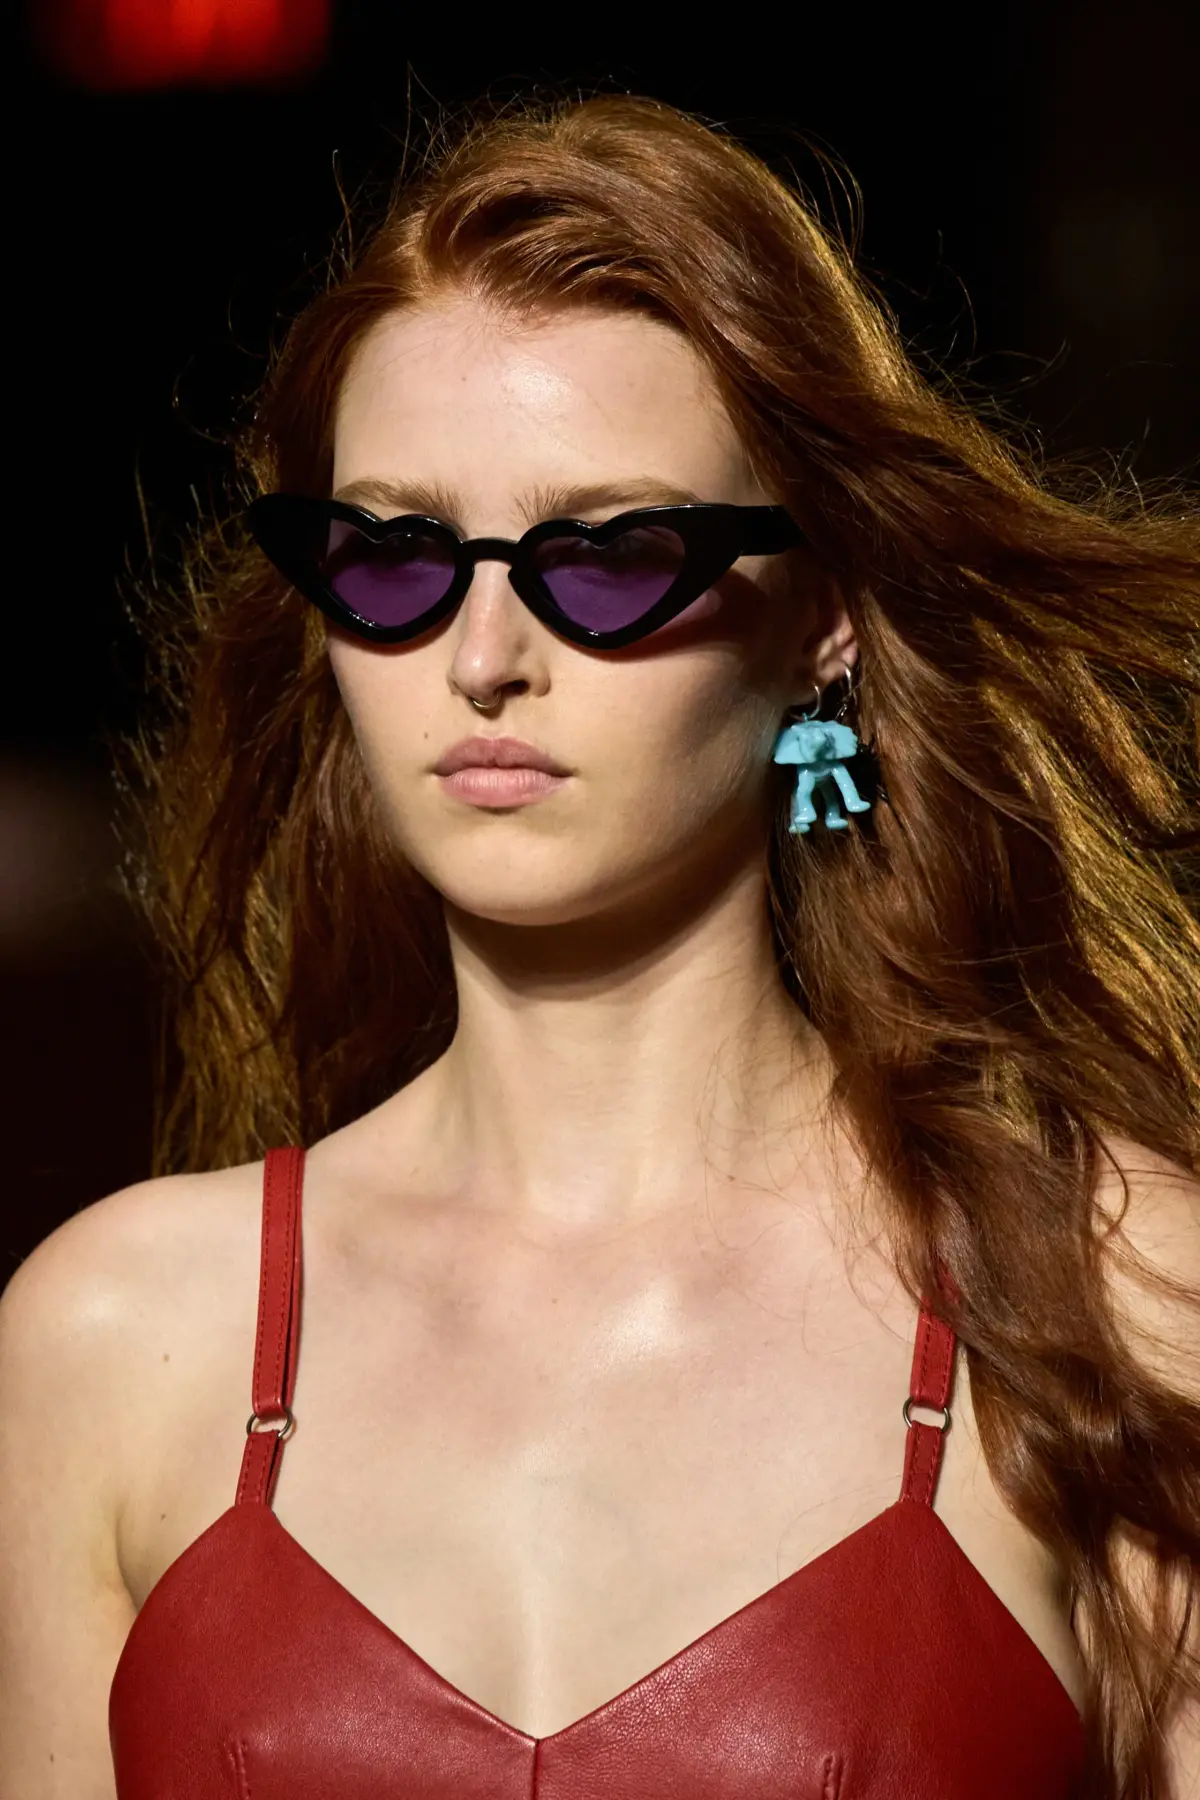 New York Fashion Week S/S 24 Eyewear Trends: From Kenzo to Coach We Love Glasses Online Buy Shop Spot Influencer Runway Model